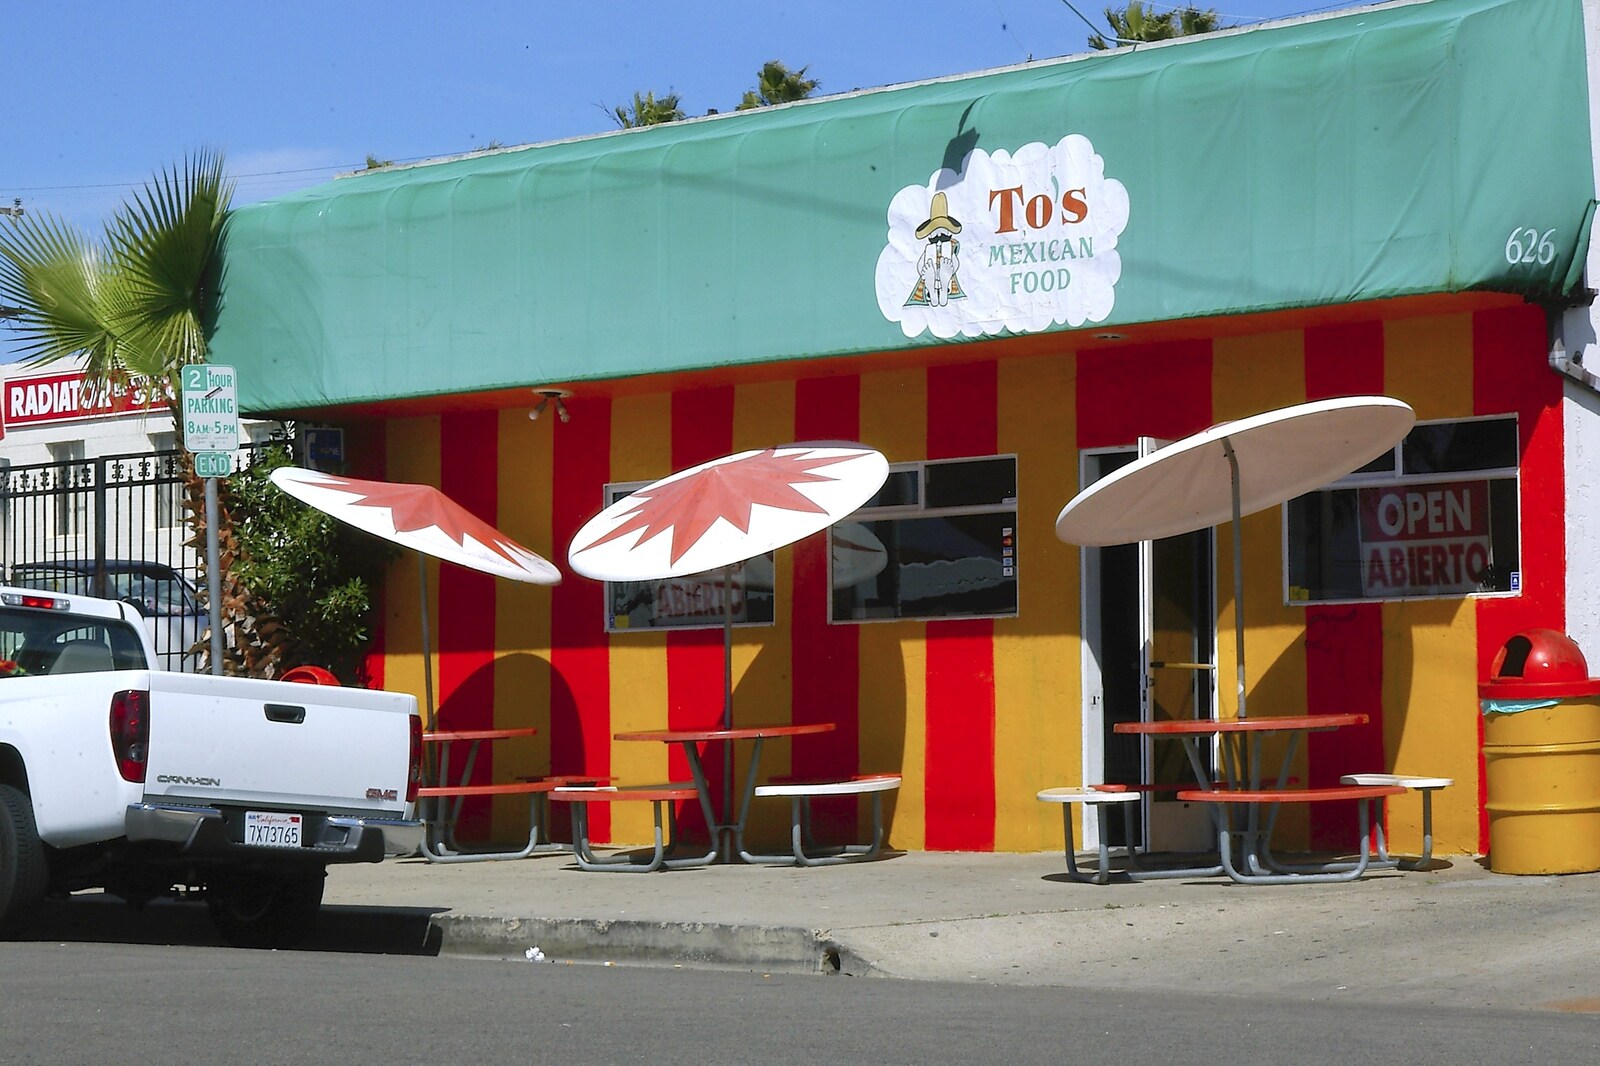 To's stripey Mexican food place from Cruisin' Route 101, San Diego to Capistrano, California - 4th March 2006